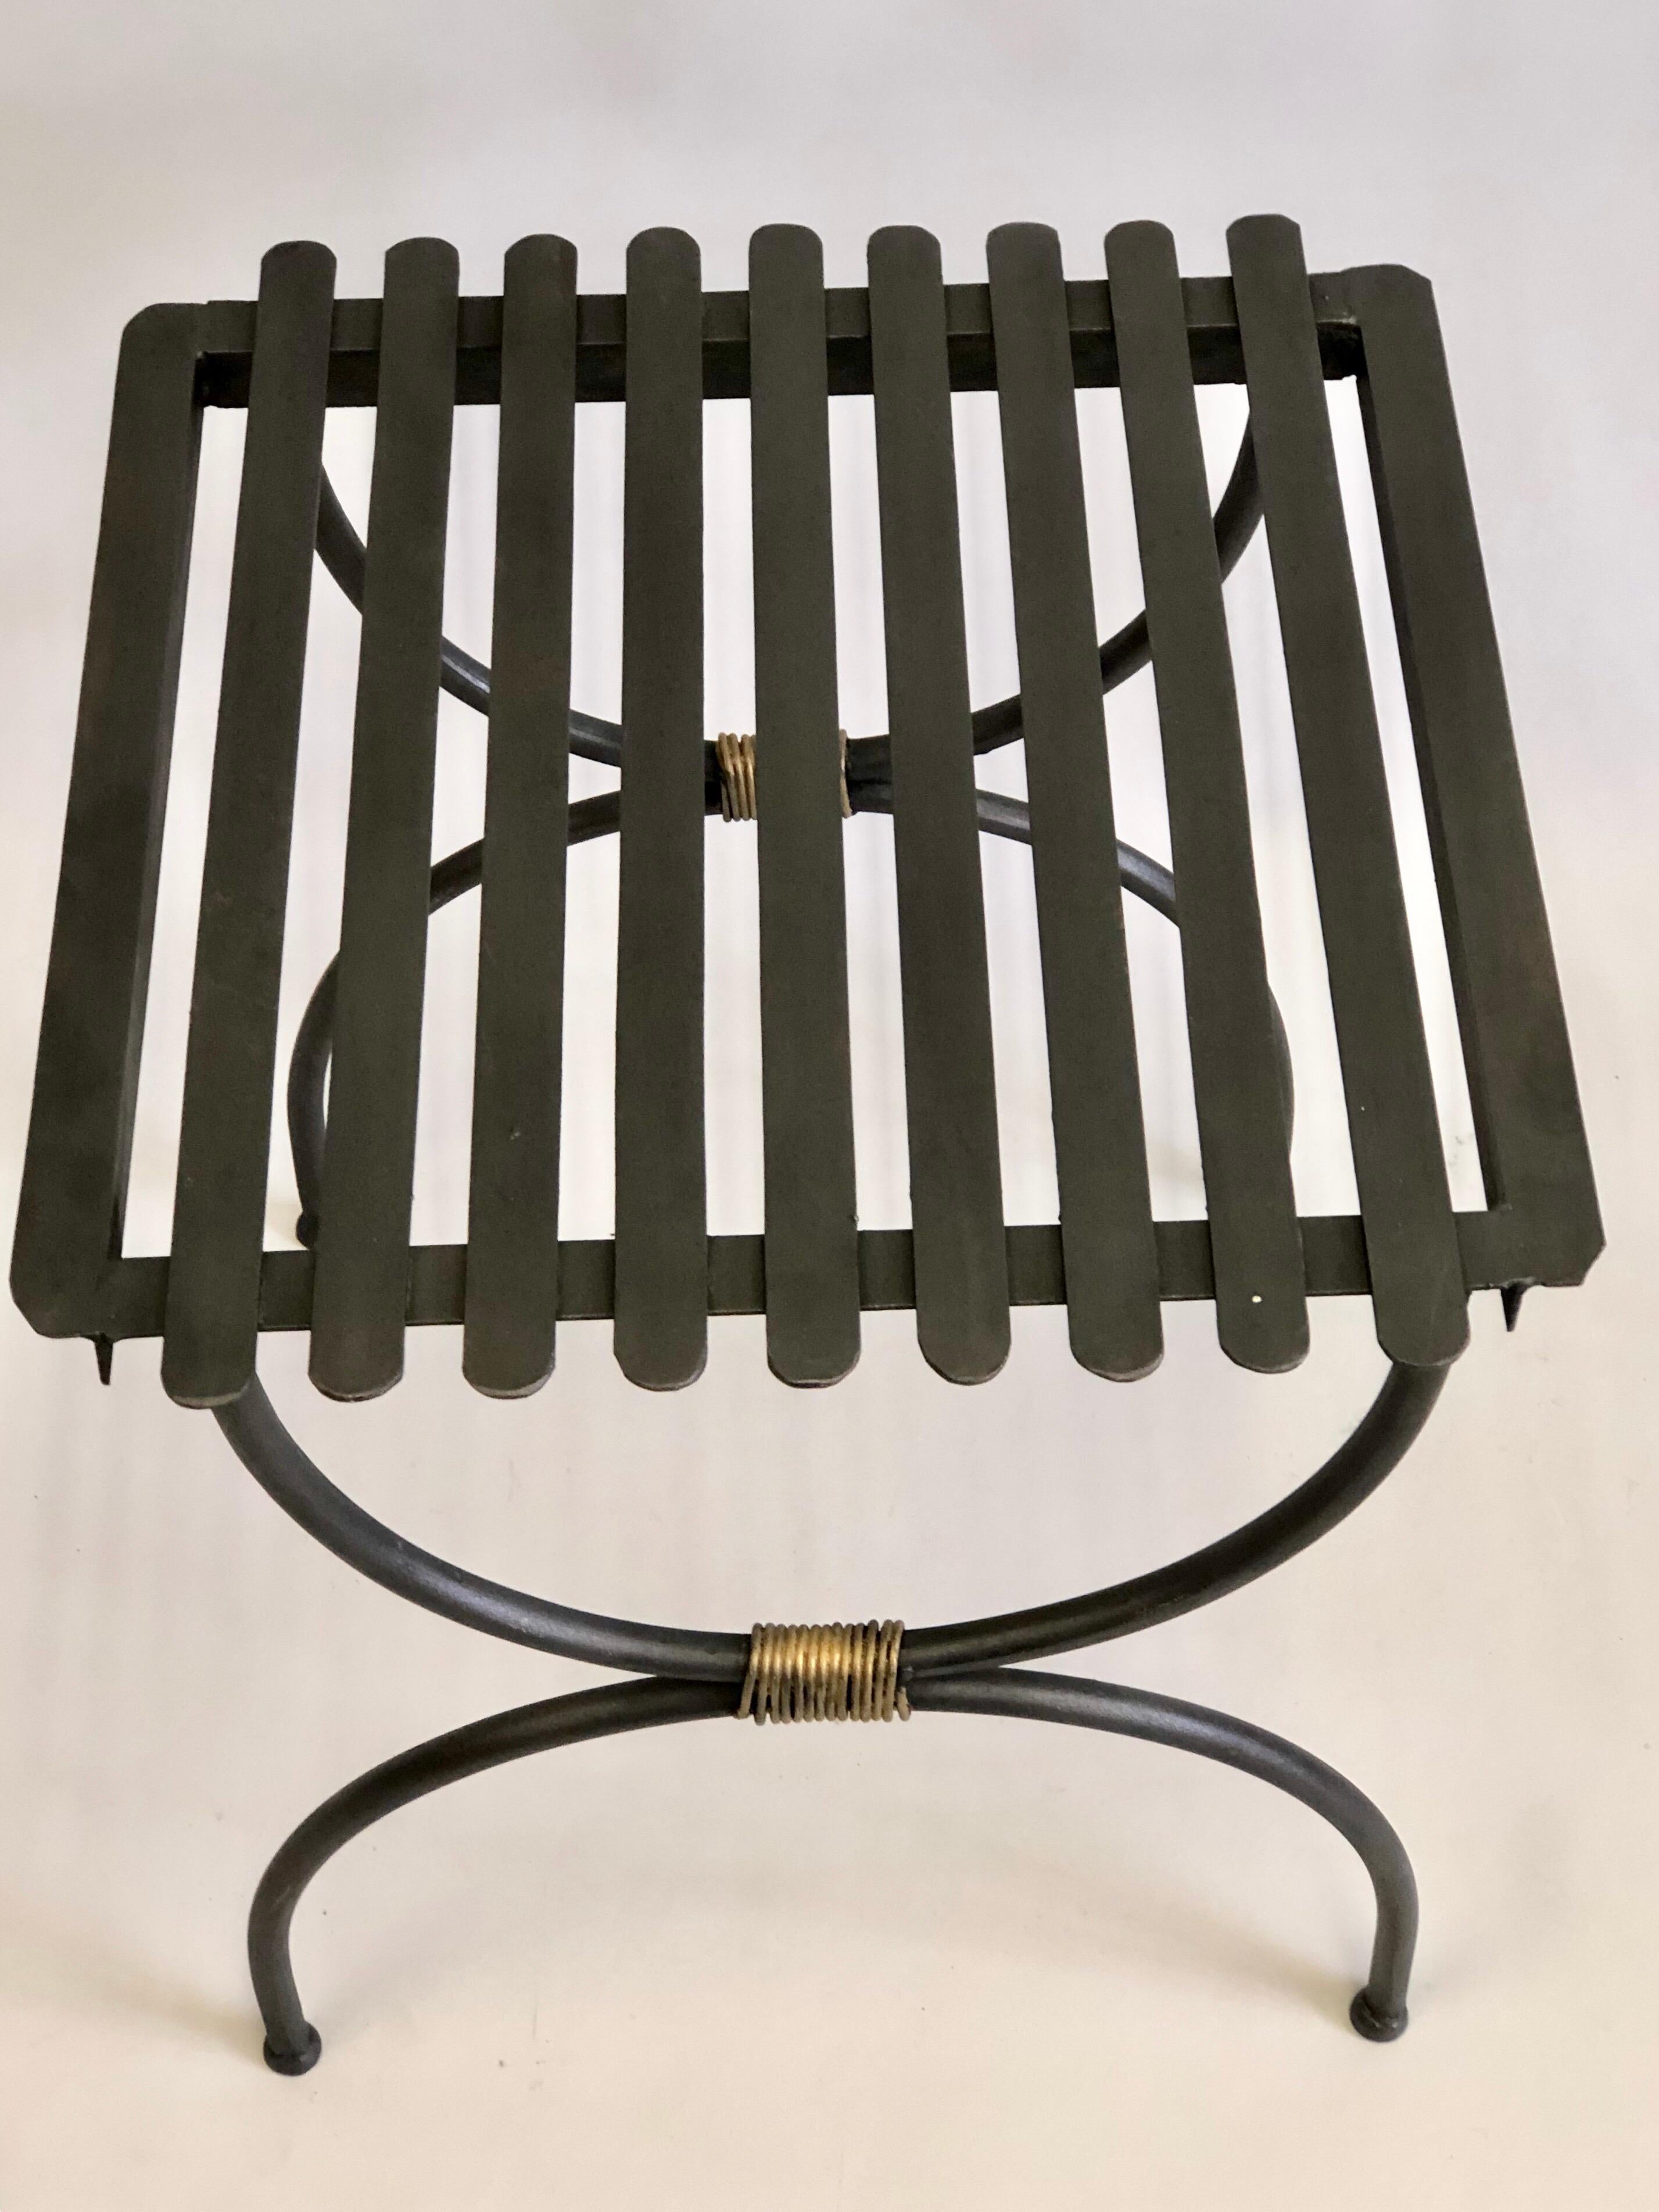 Pair of French Modern Neoclassical Iron Bench / Luggage Racks In Good Condition For Sale In New York, NY